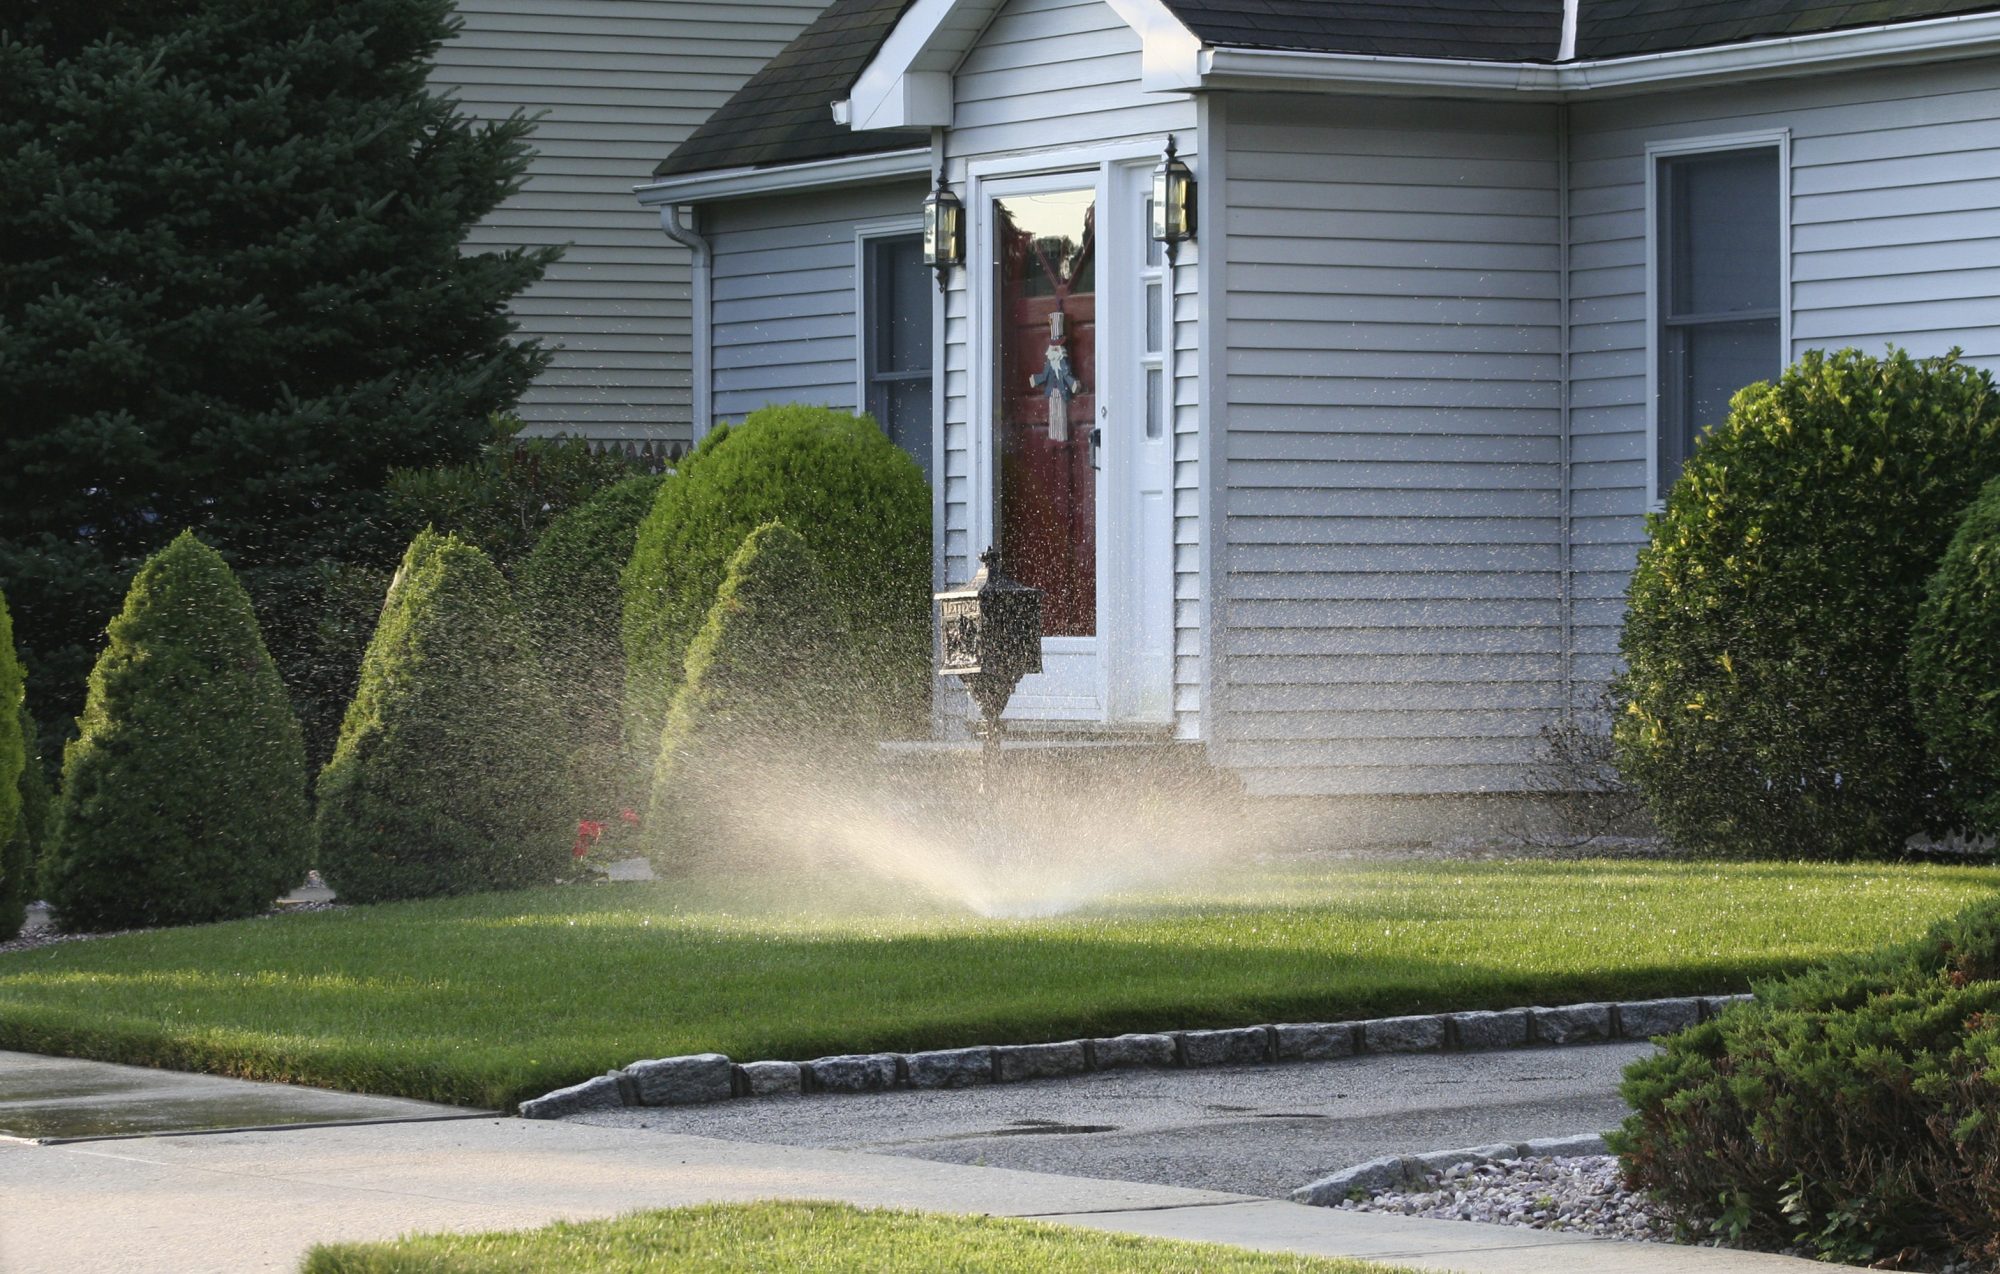 House with sprinkler watering the lawn